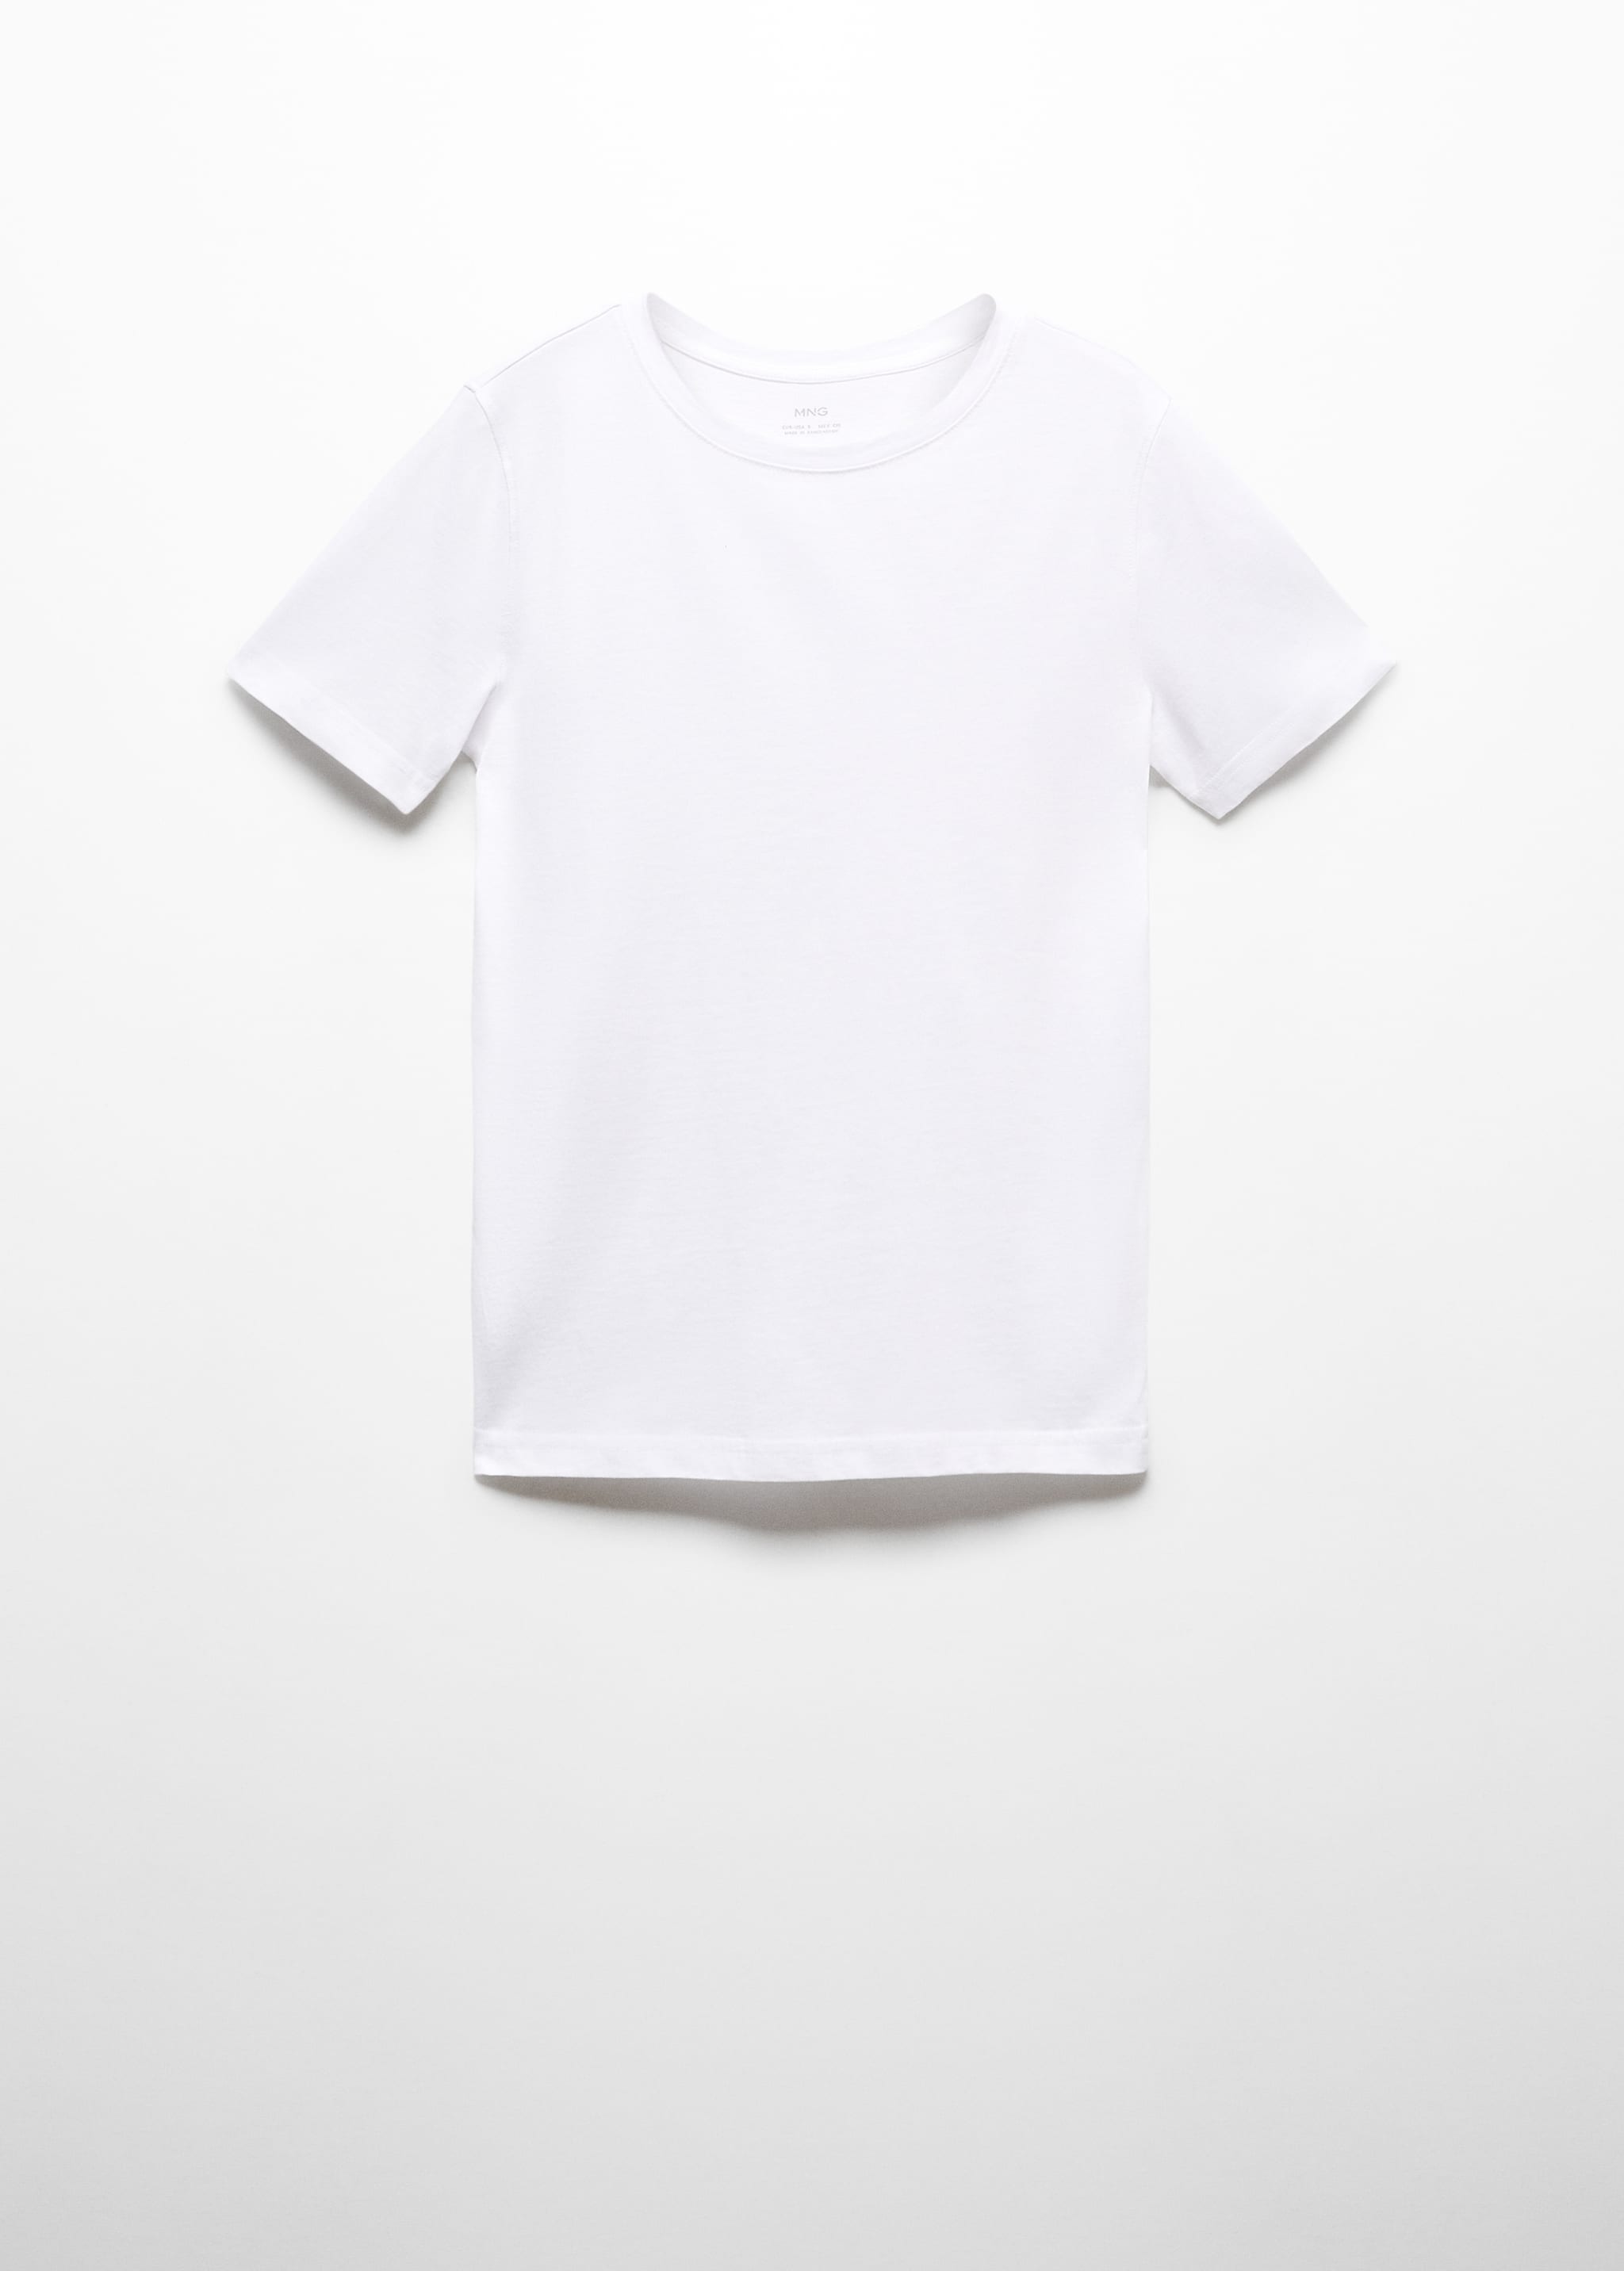 100% cotton T-shirt - Article without model